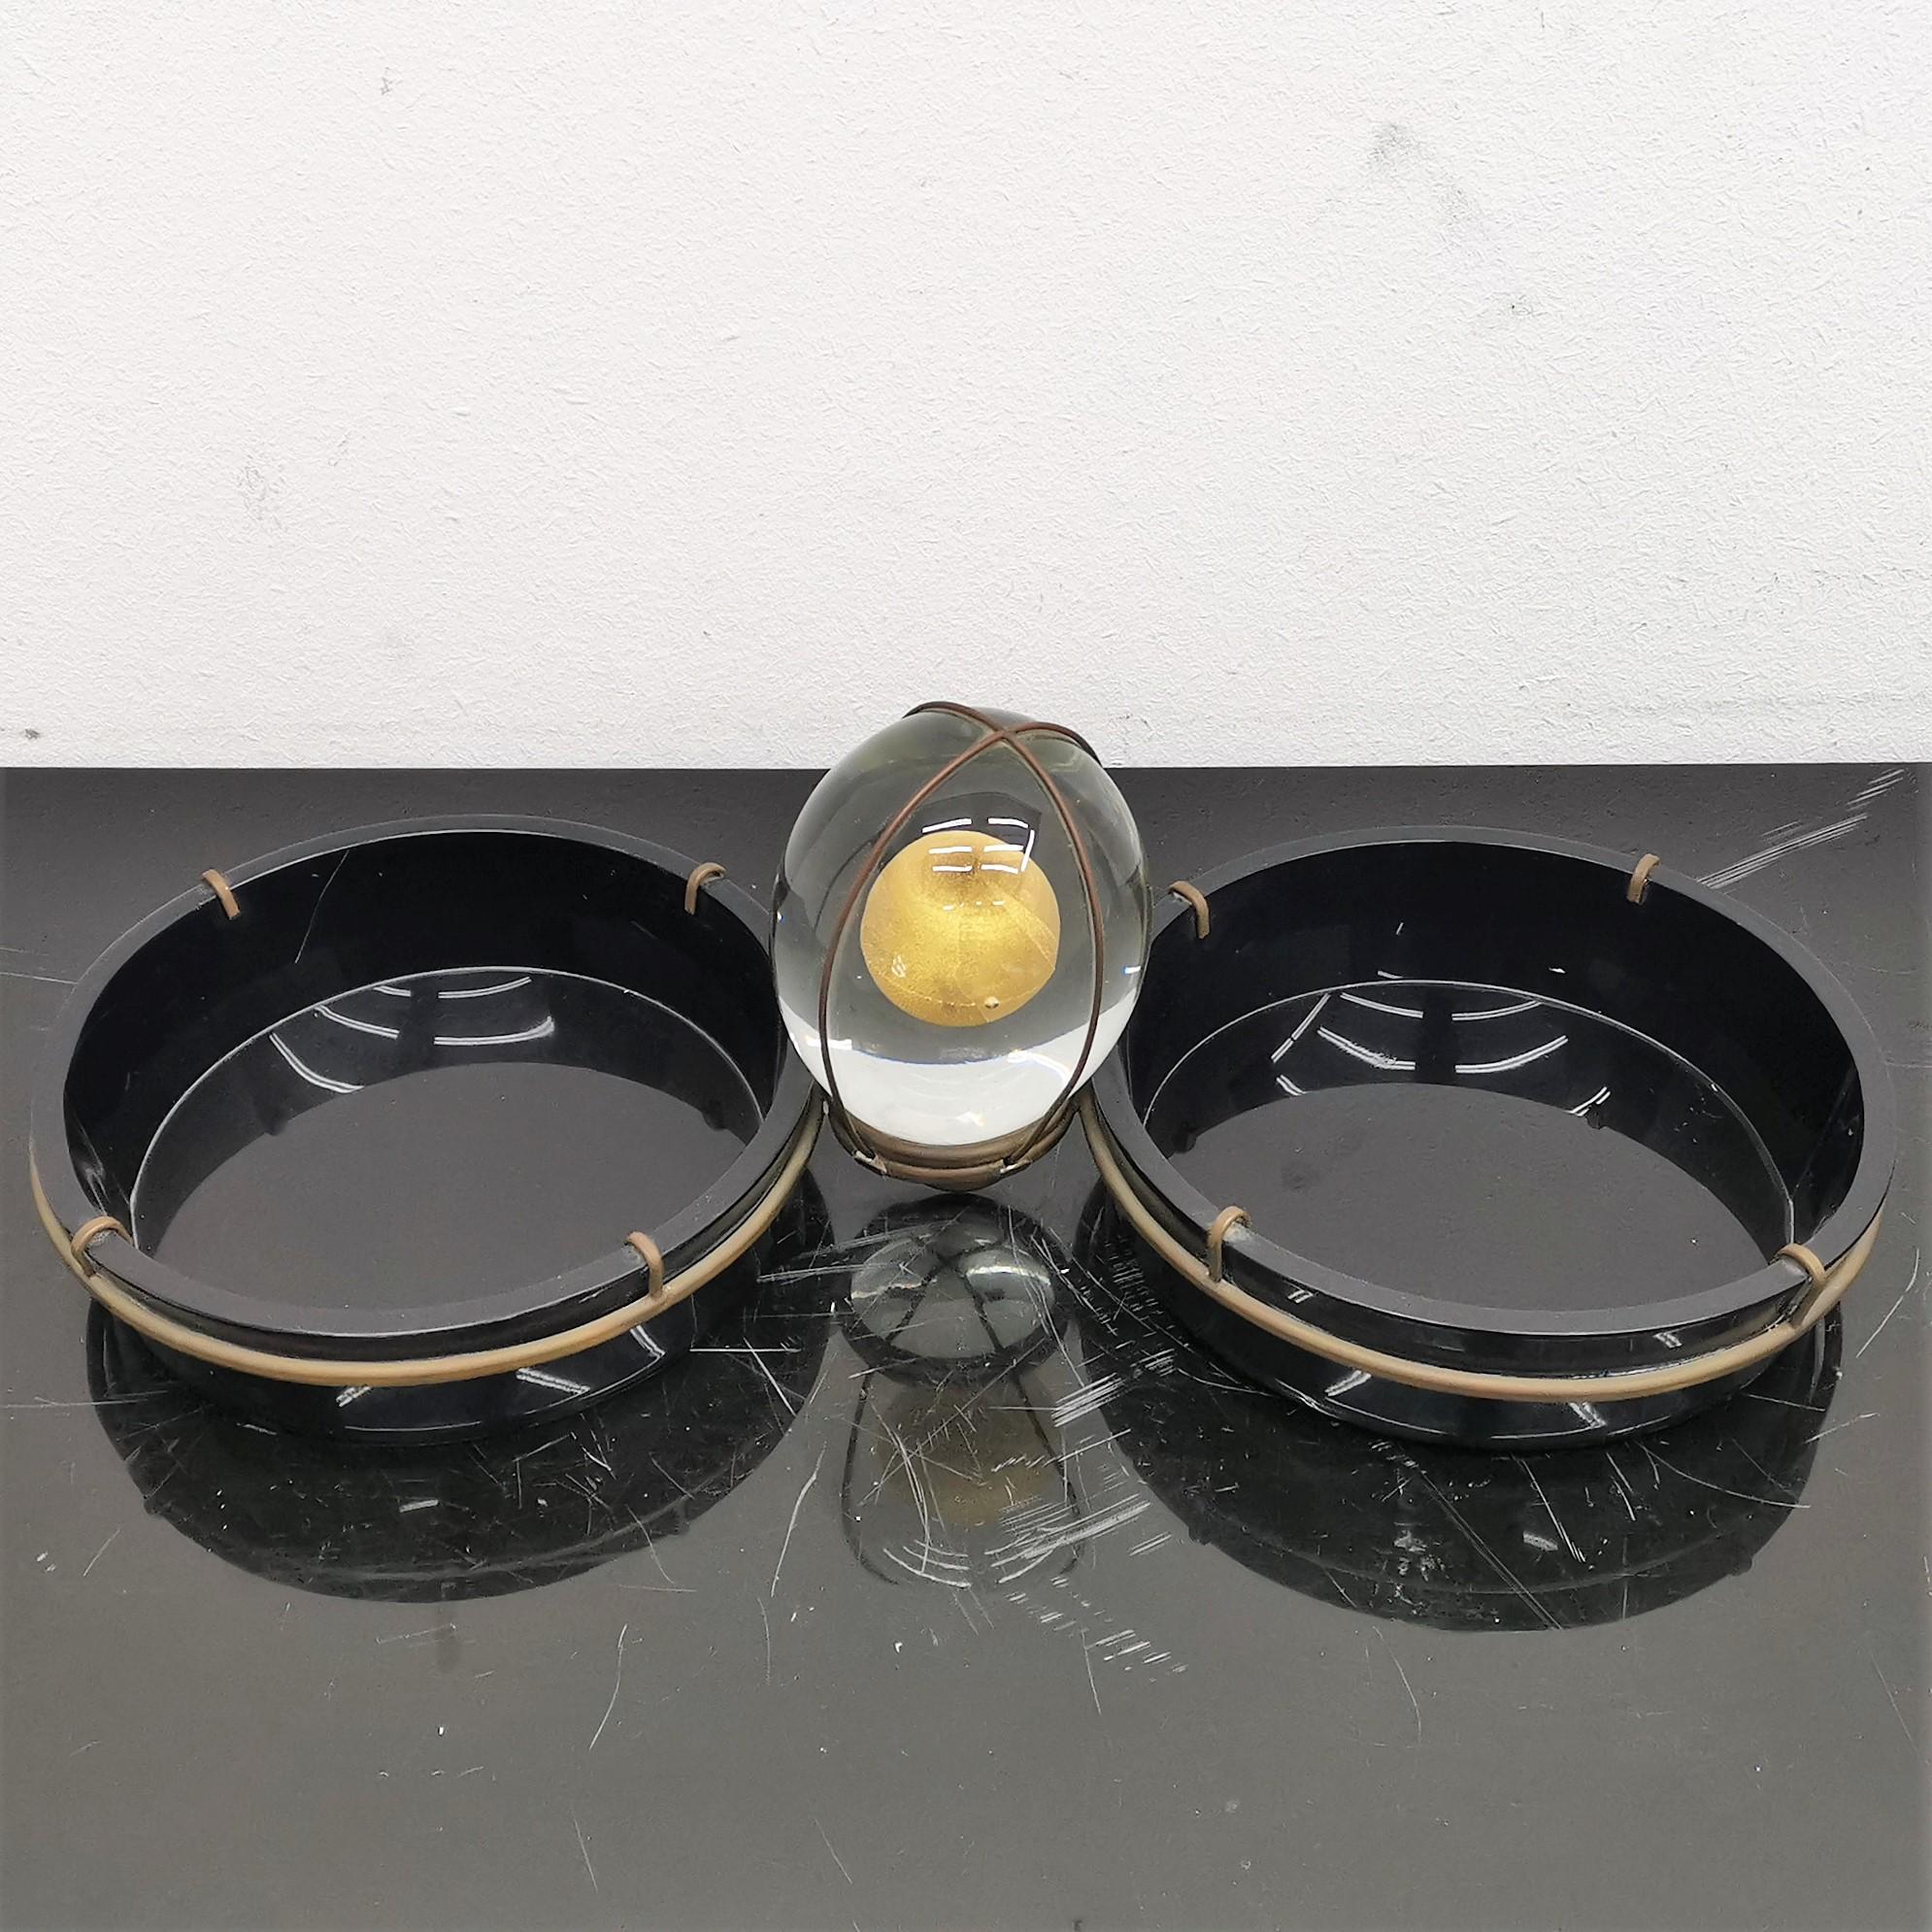 Very beautiful Tommaso Barbi empty pocket, with two circular containers in black plastic at the sides of a glass spheroid with a gold leaf sphere inside. All the shapes are joined together by brass structure, 70s, Italy.
Wear consistent with age